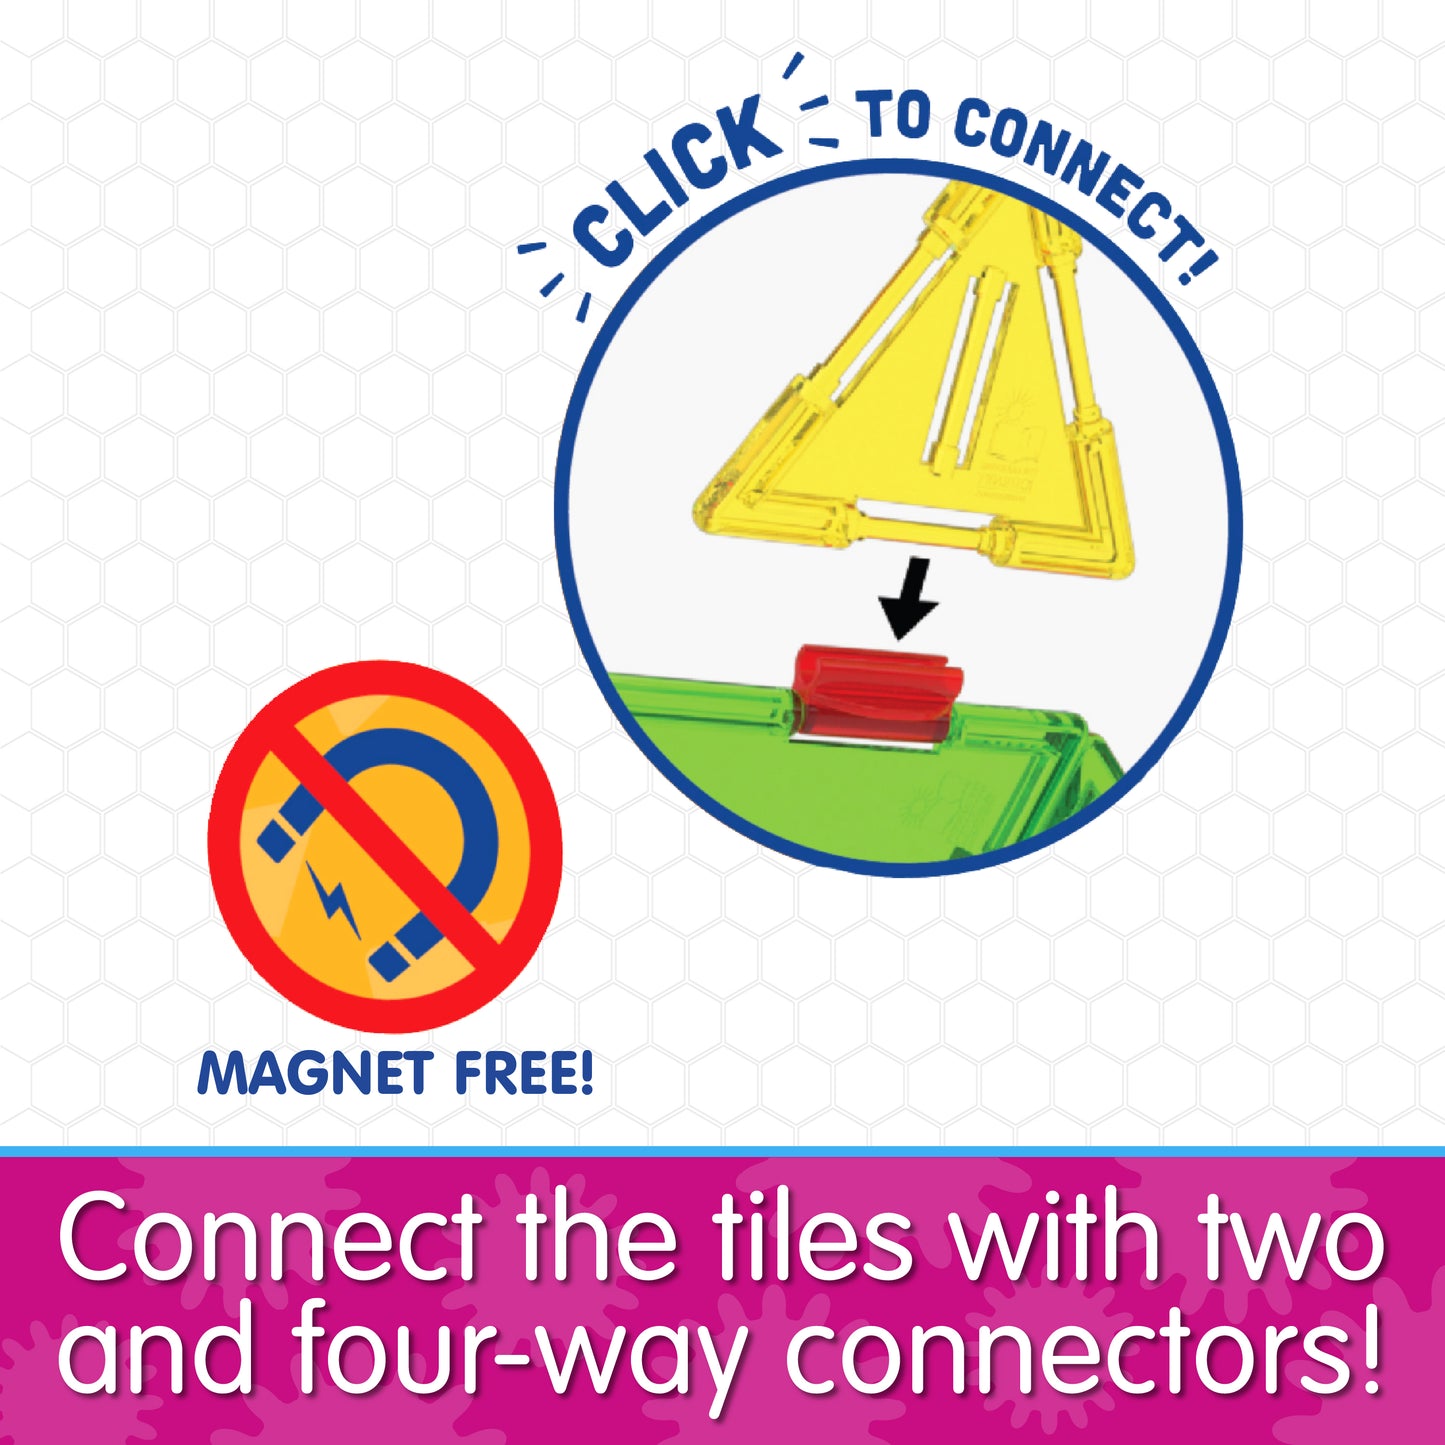 Infographic about Techno Tiles' features that says, "Connect the tiles with two and four-way connectors!"